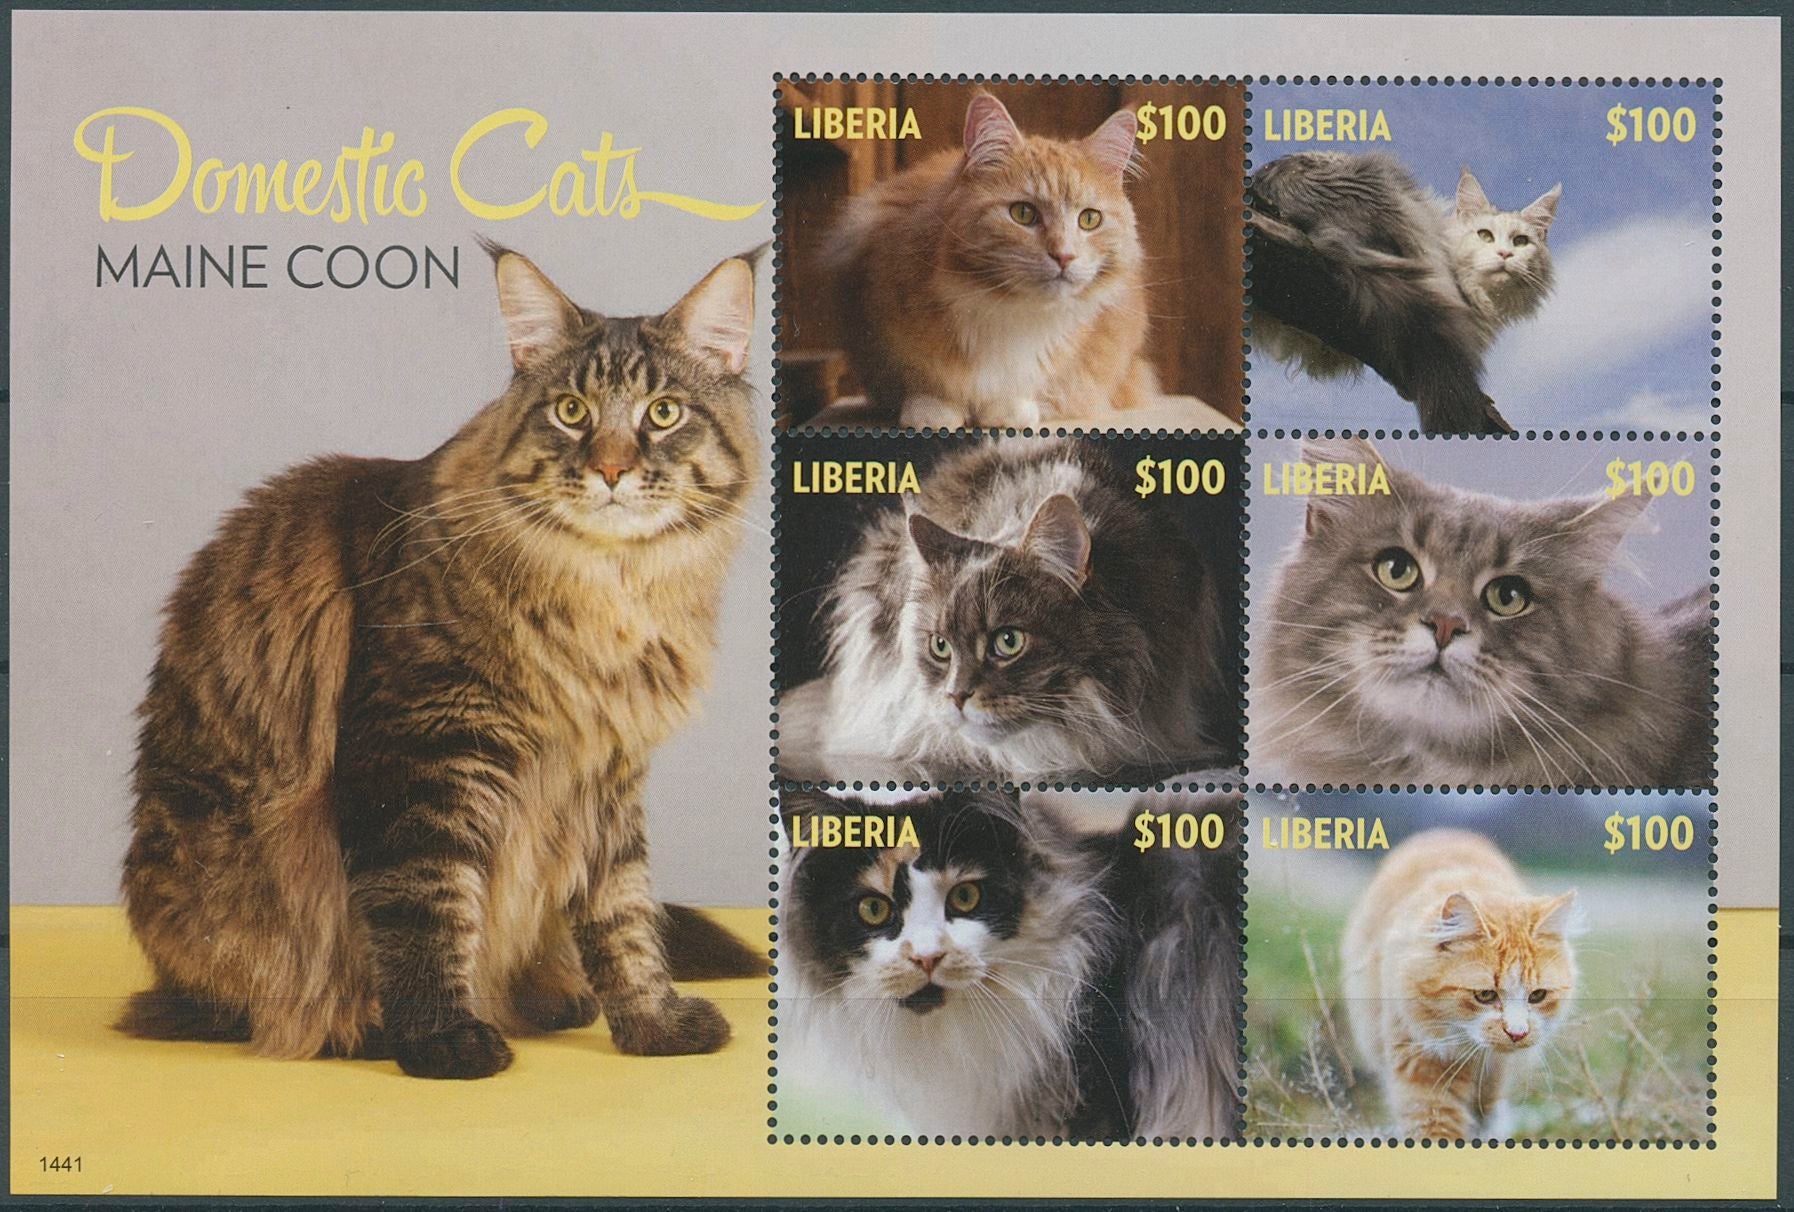 Liberia 2014 MNH Domestic Cats Stamps Maine Coon Pets 6v M/S II